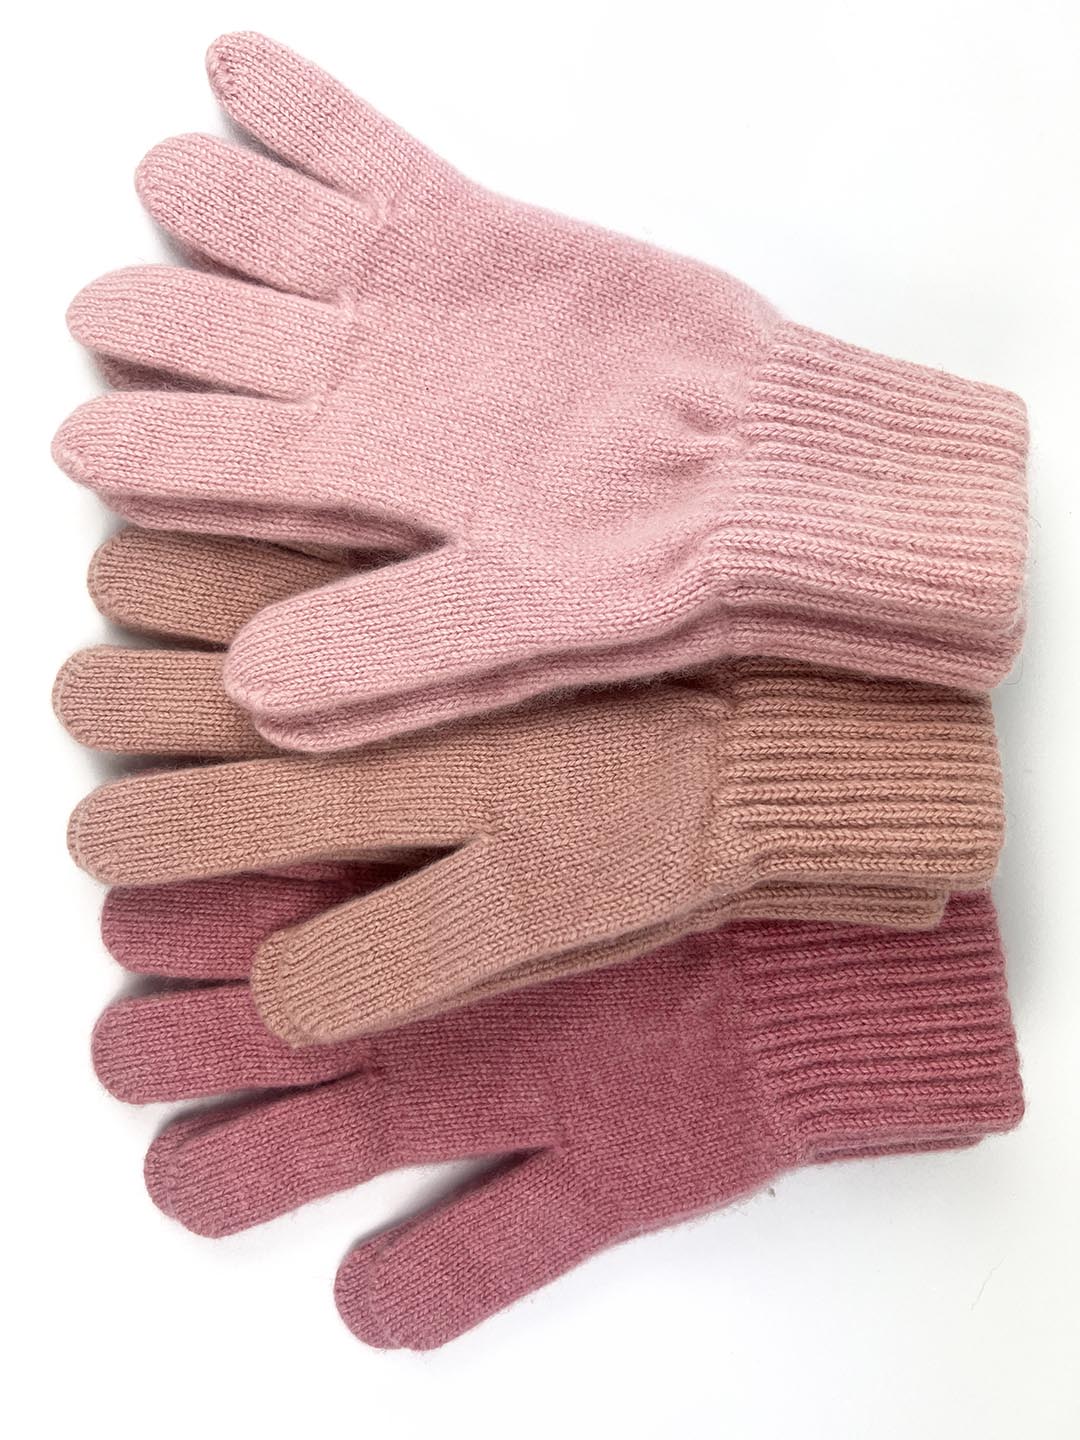 Rosie sugden cashmere gloves in shades of pink. Knitted in the Scottish borders